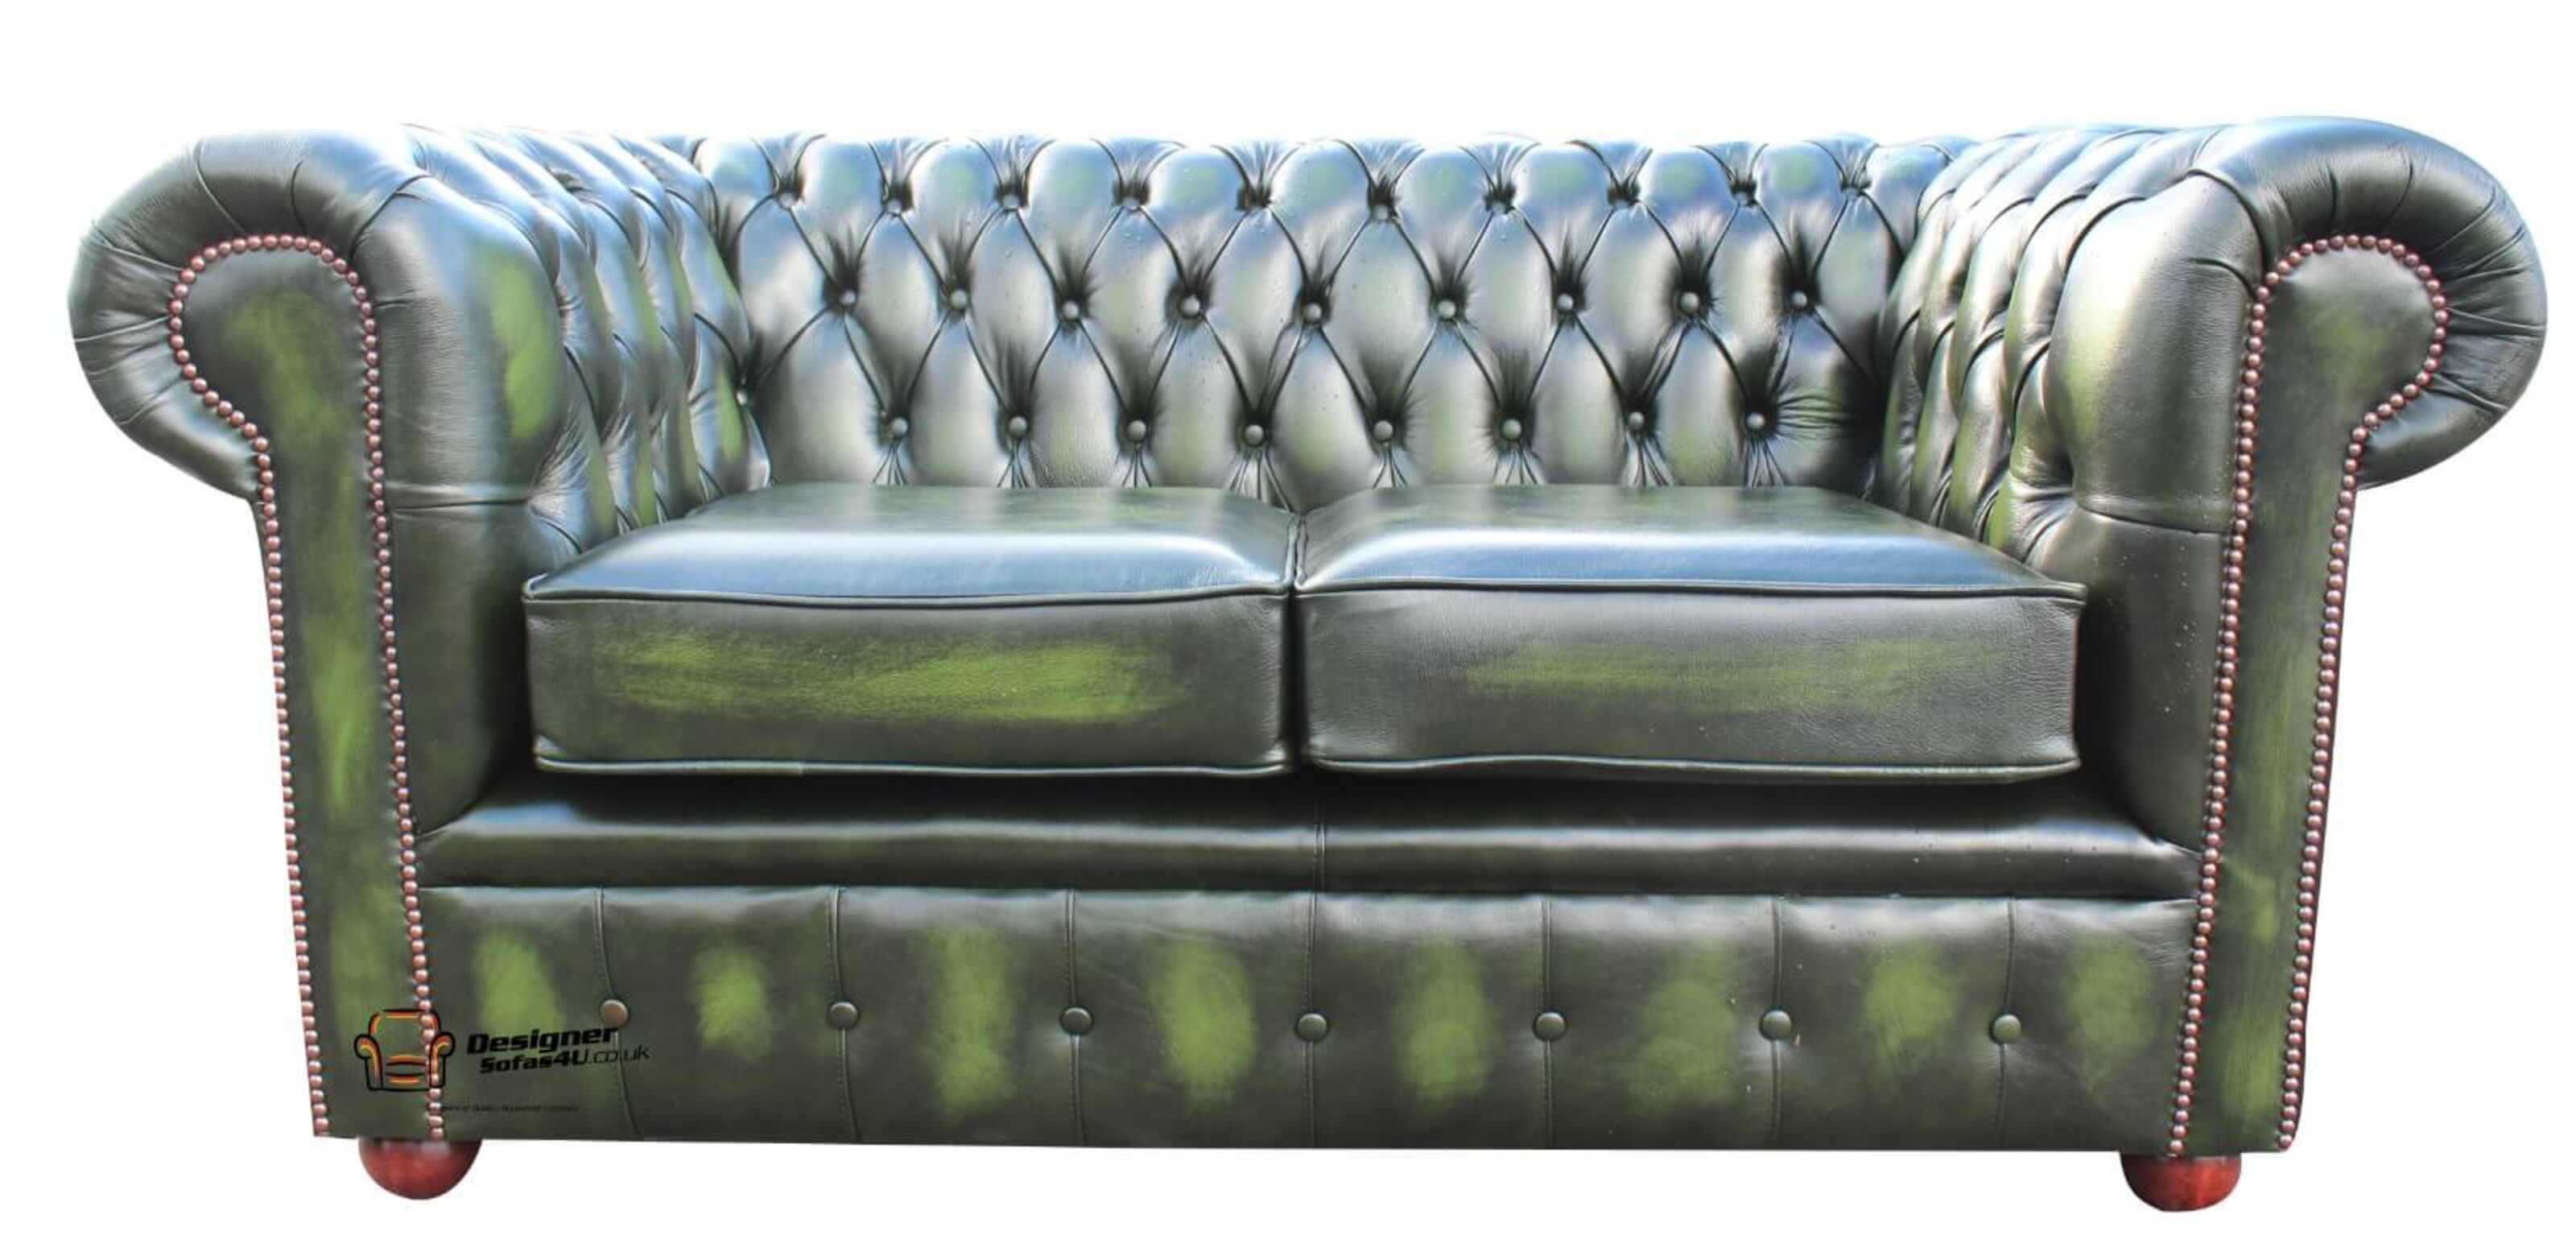 Luxury Chesterfield Sofas Available in JB  %Post Title